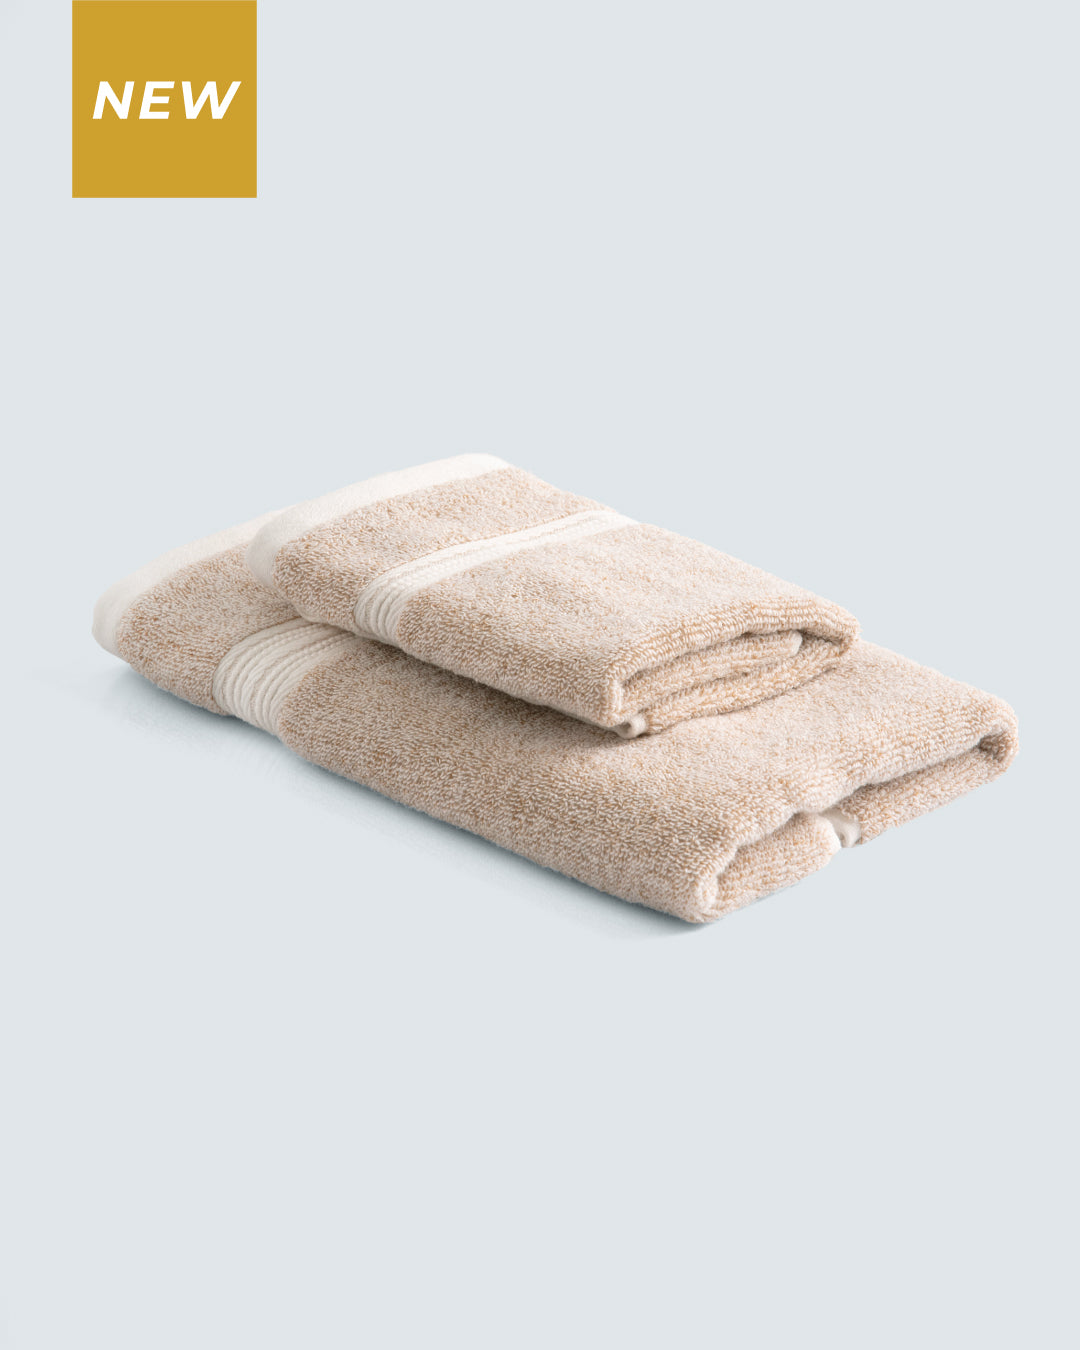 2 in 1 Bamboo Towel (Face & Hand)